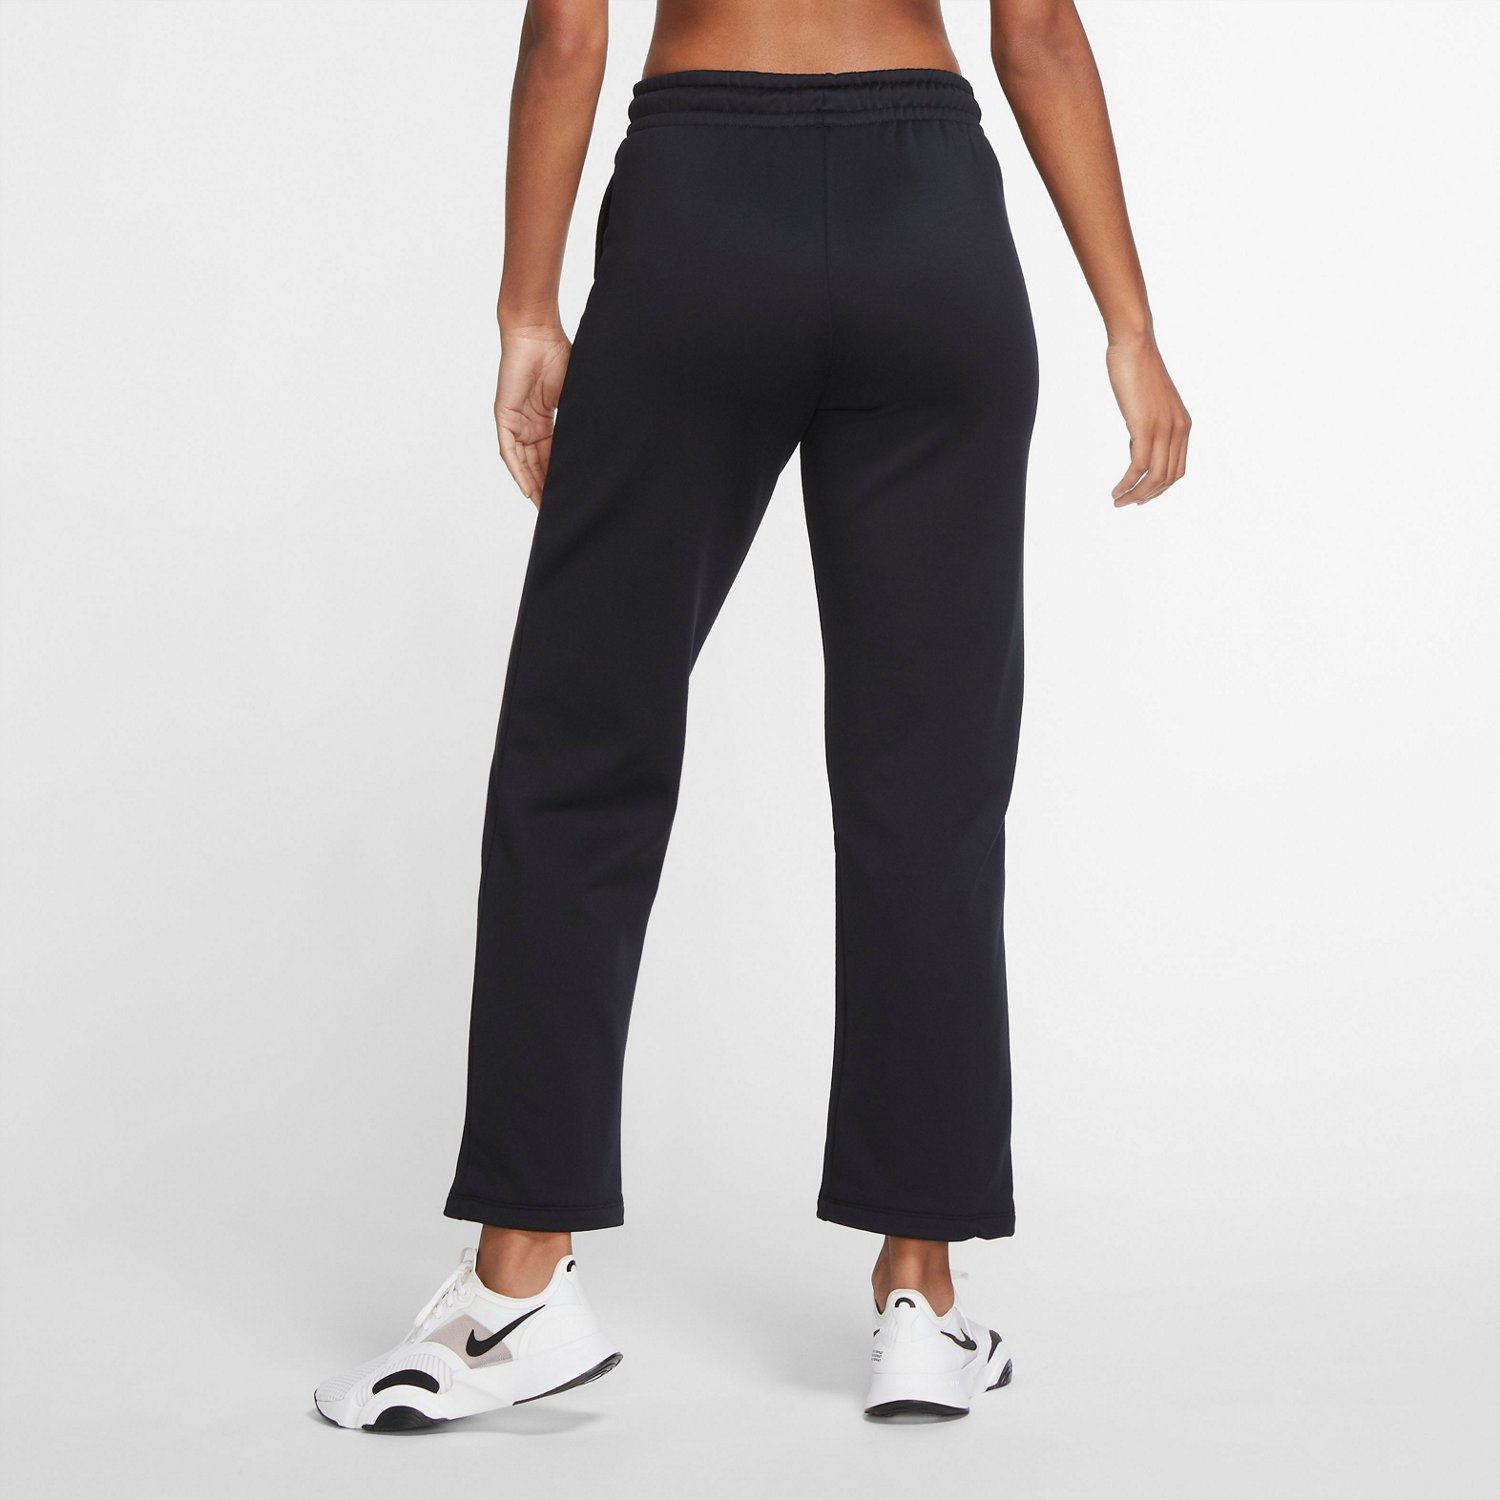 Nike Women's Therma Dri-FIT All Time Classic Training Pants